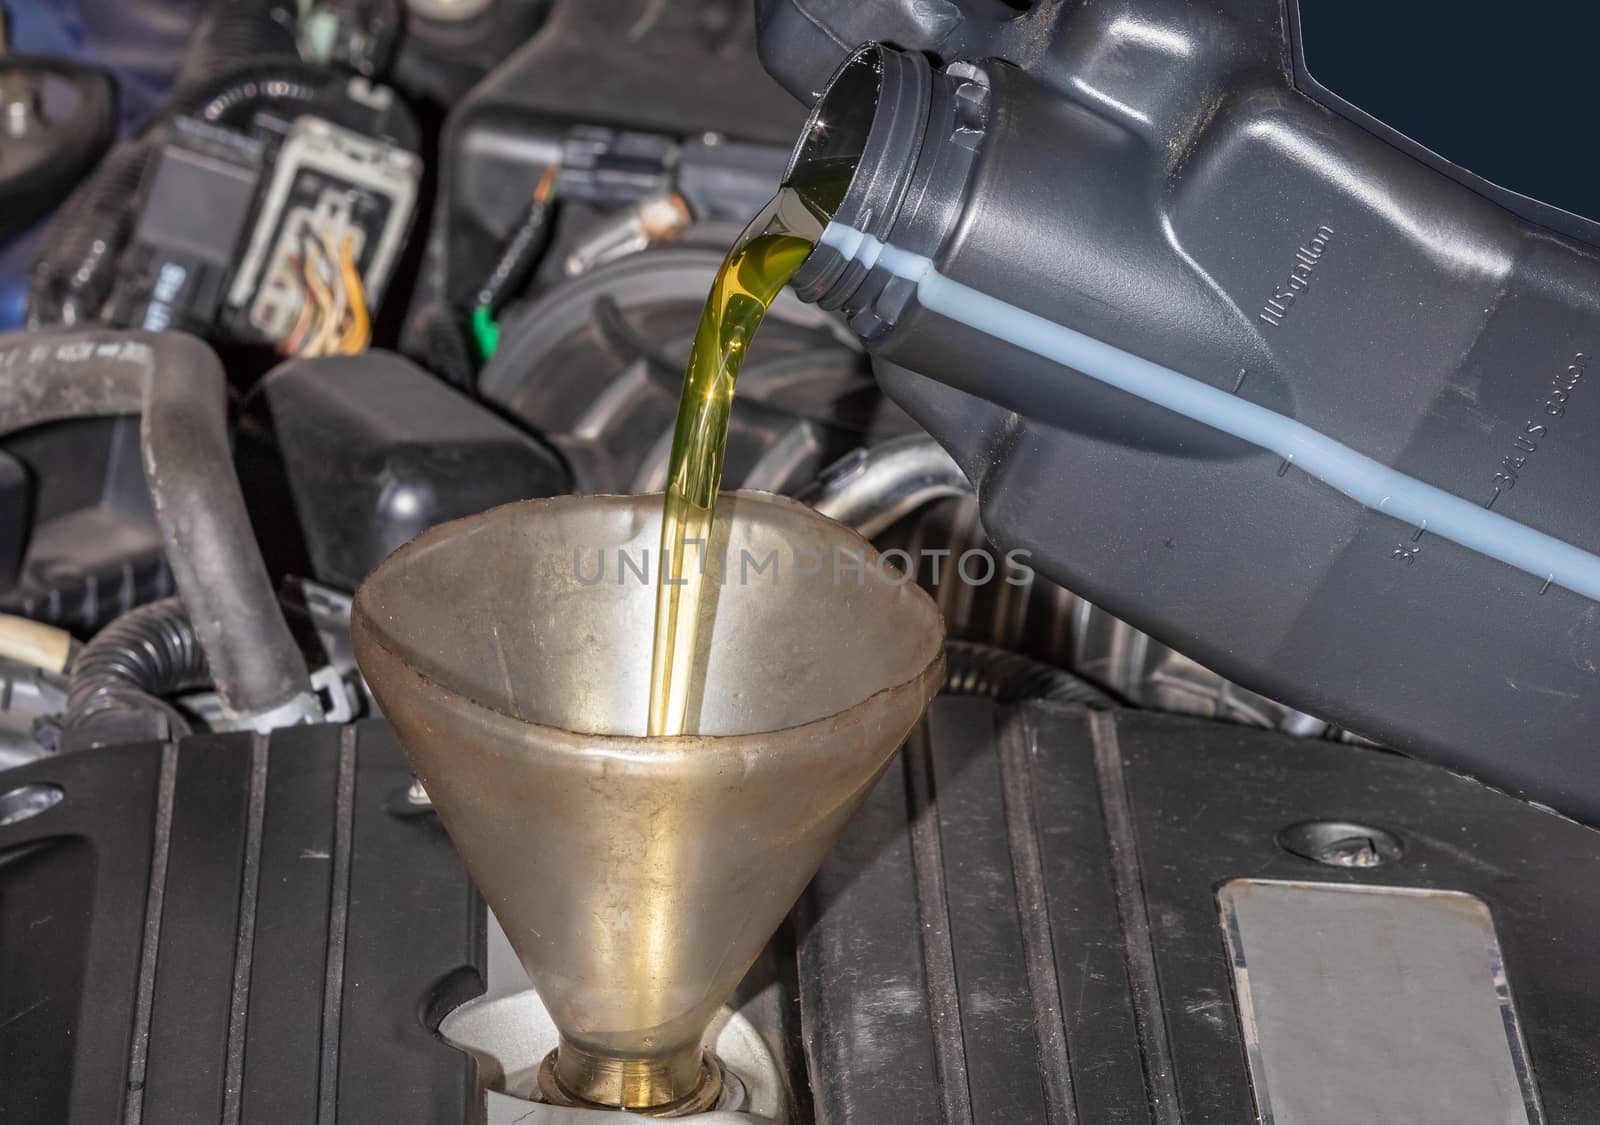 Mechanic topping up the oil in a car pouring a pint of oil through a funnel into the engine, close up of the oil and funnel by DamantisZ